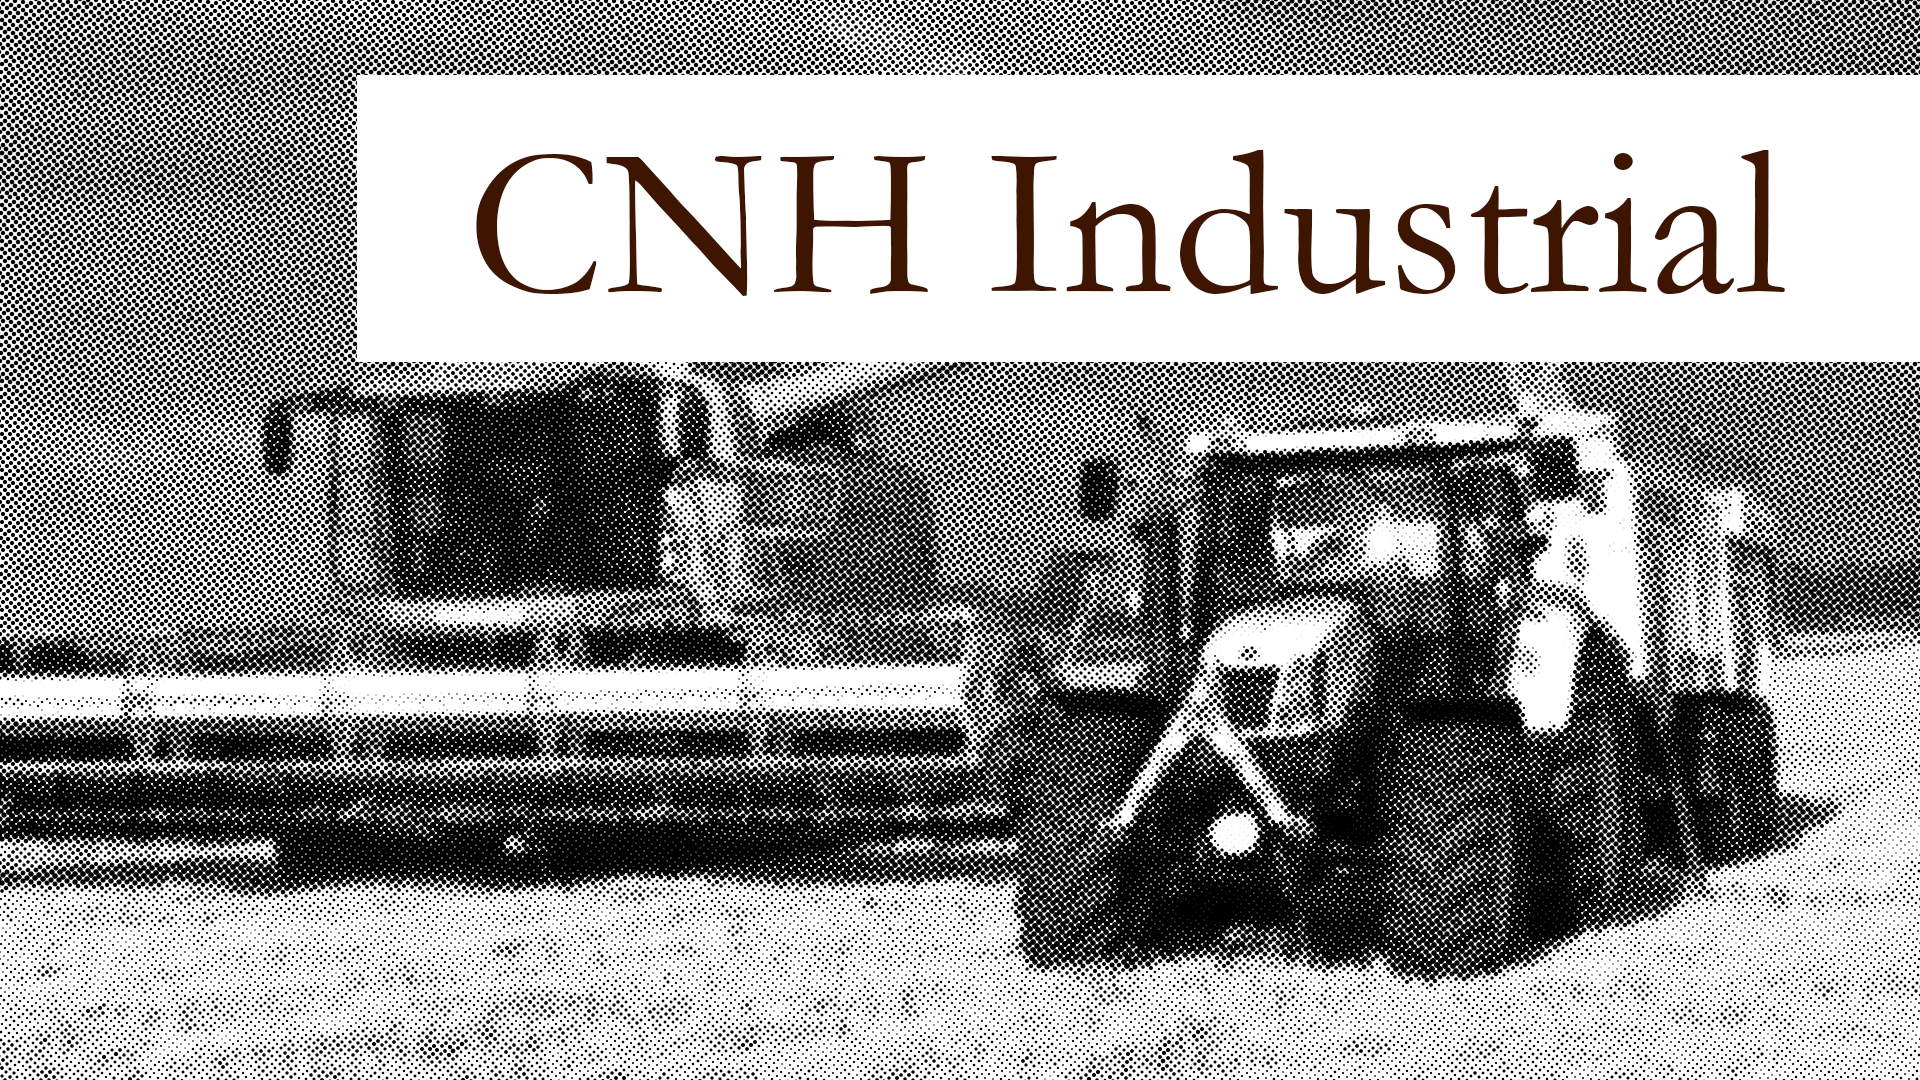 CNH Industrial: good and trusted products